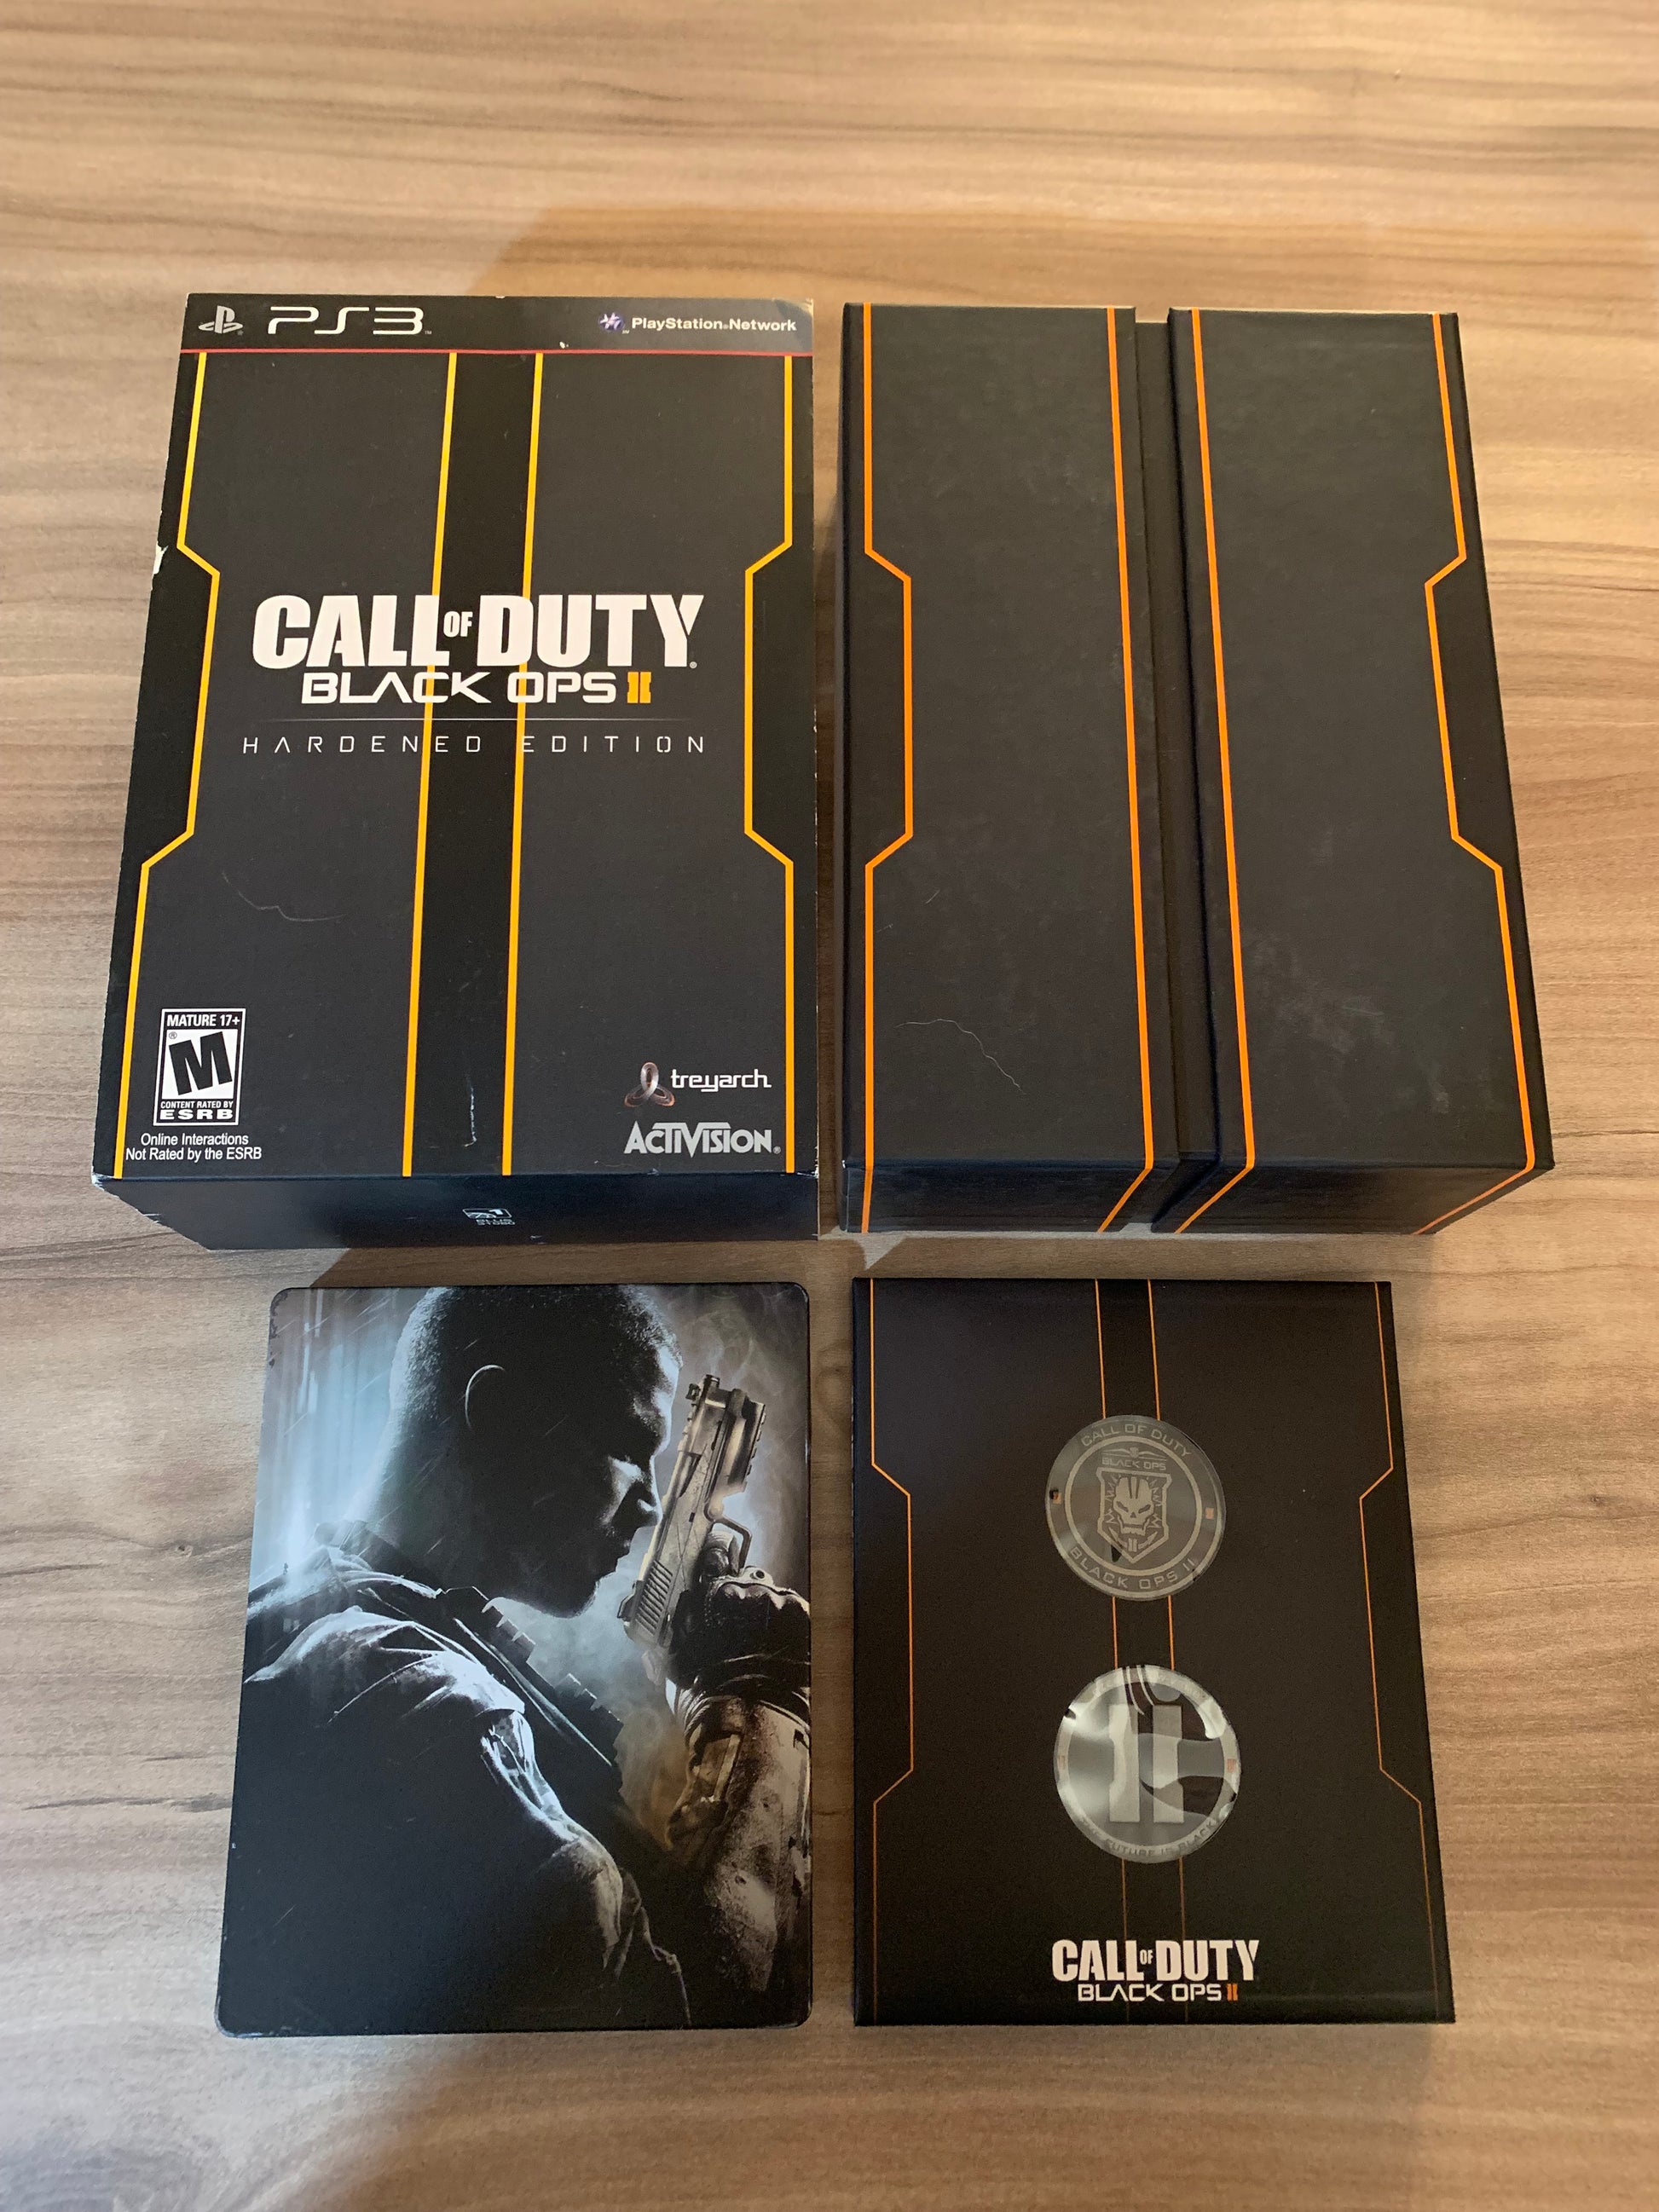 PiXEL-RETRO.COM : SONY PLAYSTATION 3 (PS3) COMPLET CIB BOX MANUAL GAME NTSC CALL OF DUTY BLACK OPS II HARDENED EDITION